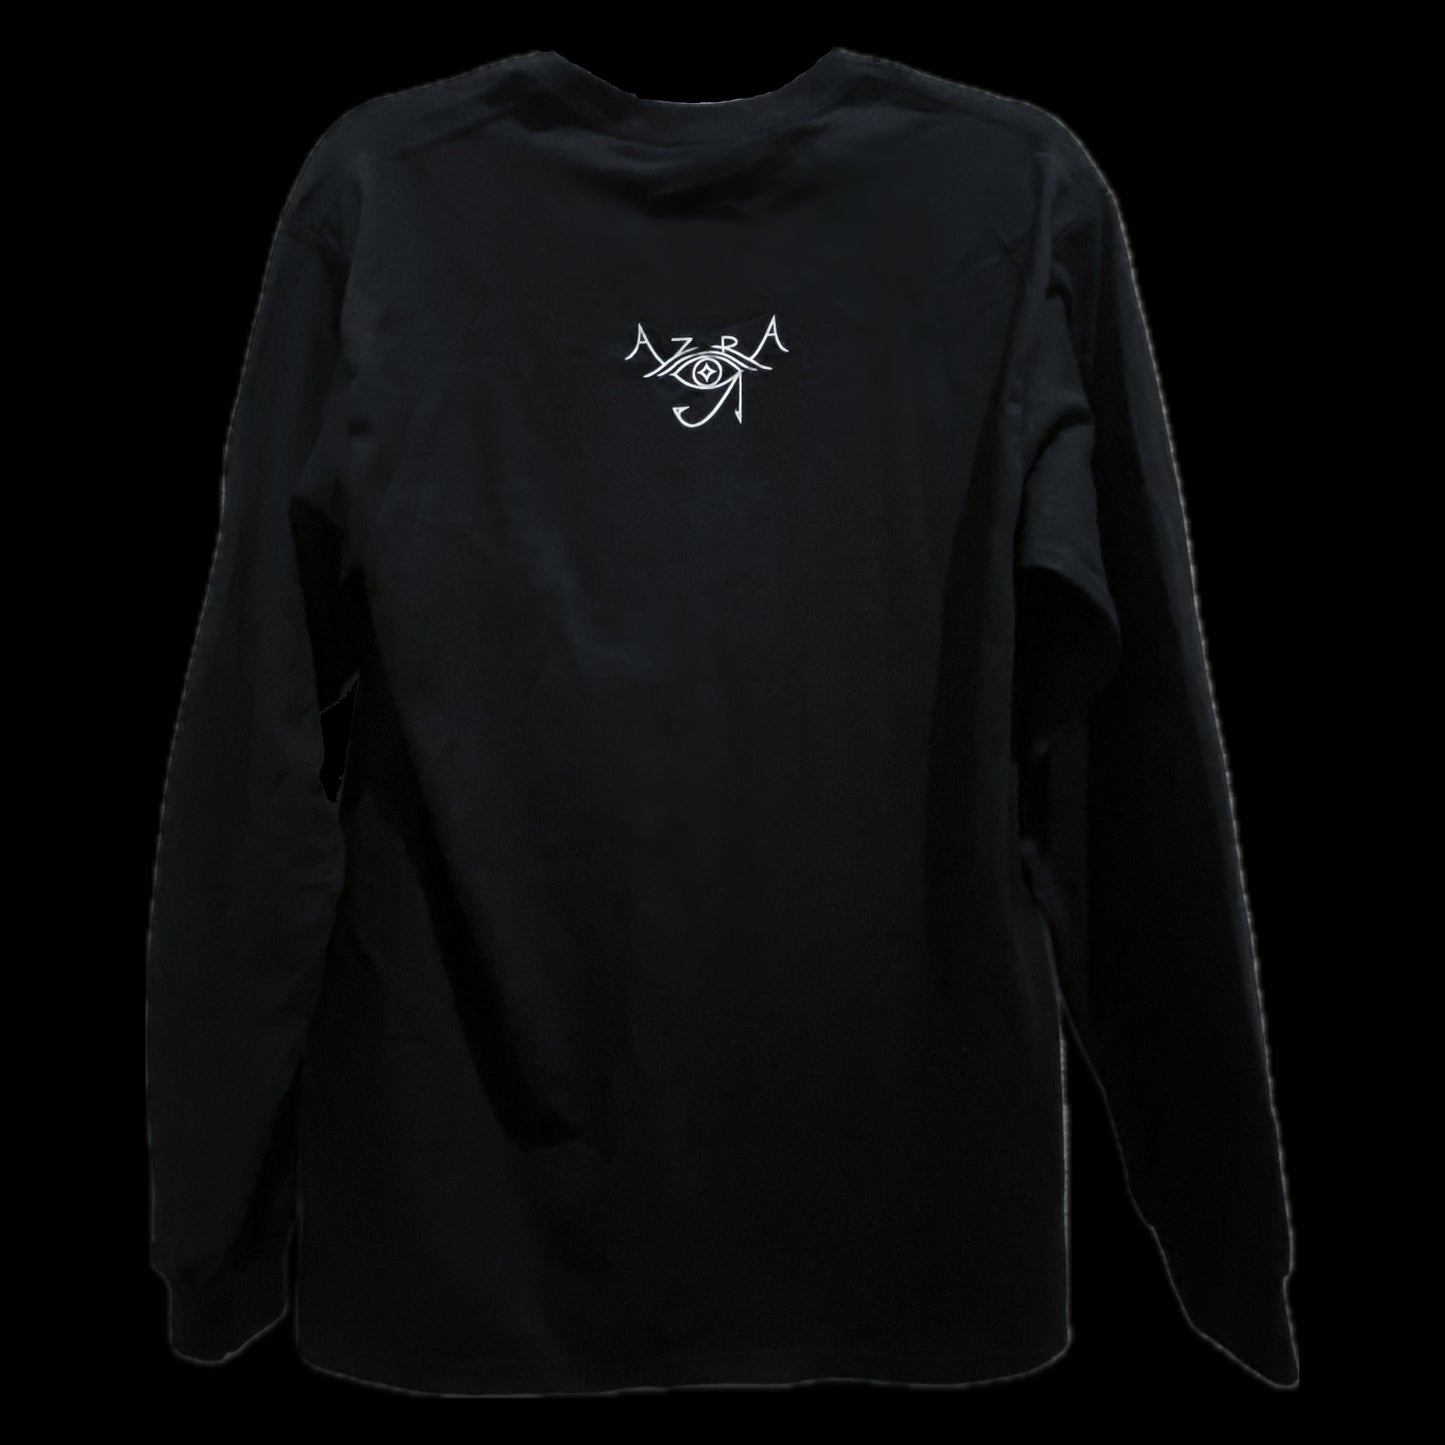 [PRE-ORDER NOW] LIMITED: "6th Dimension" AZRA Merch Capsule Long Sleeve Unisex T-Shirt